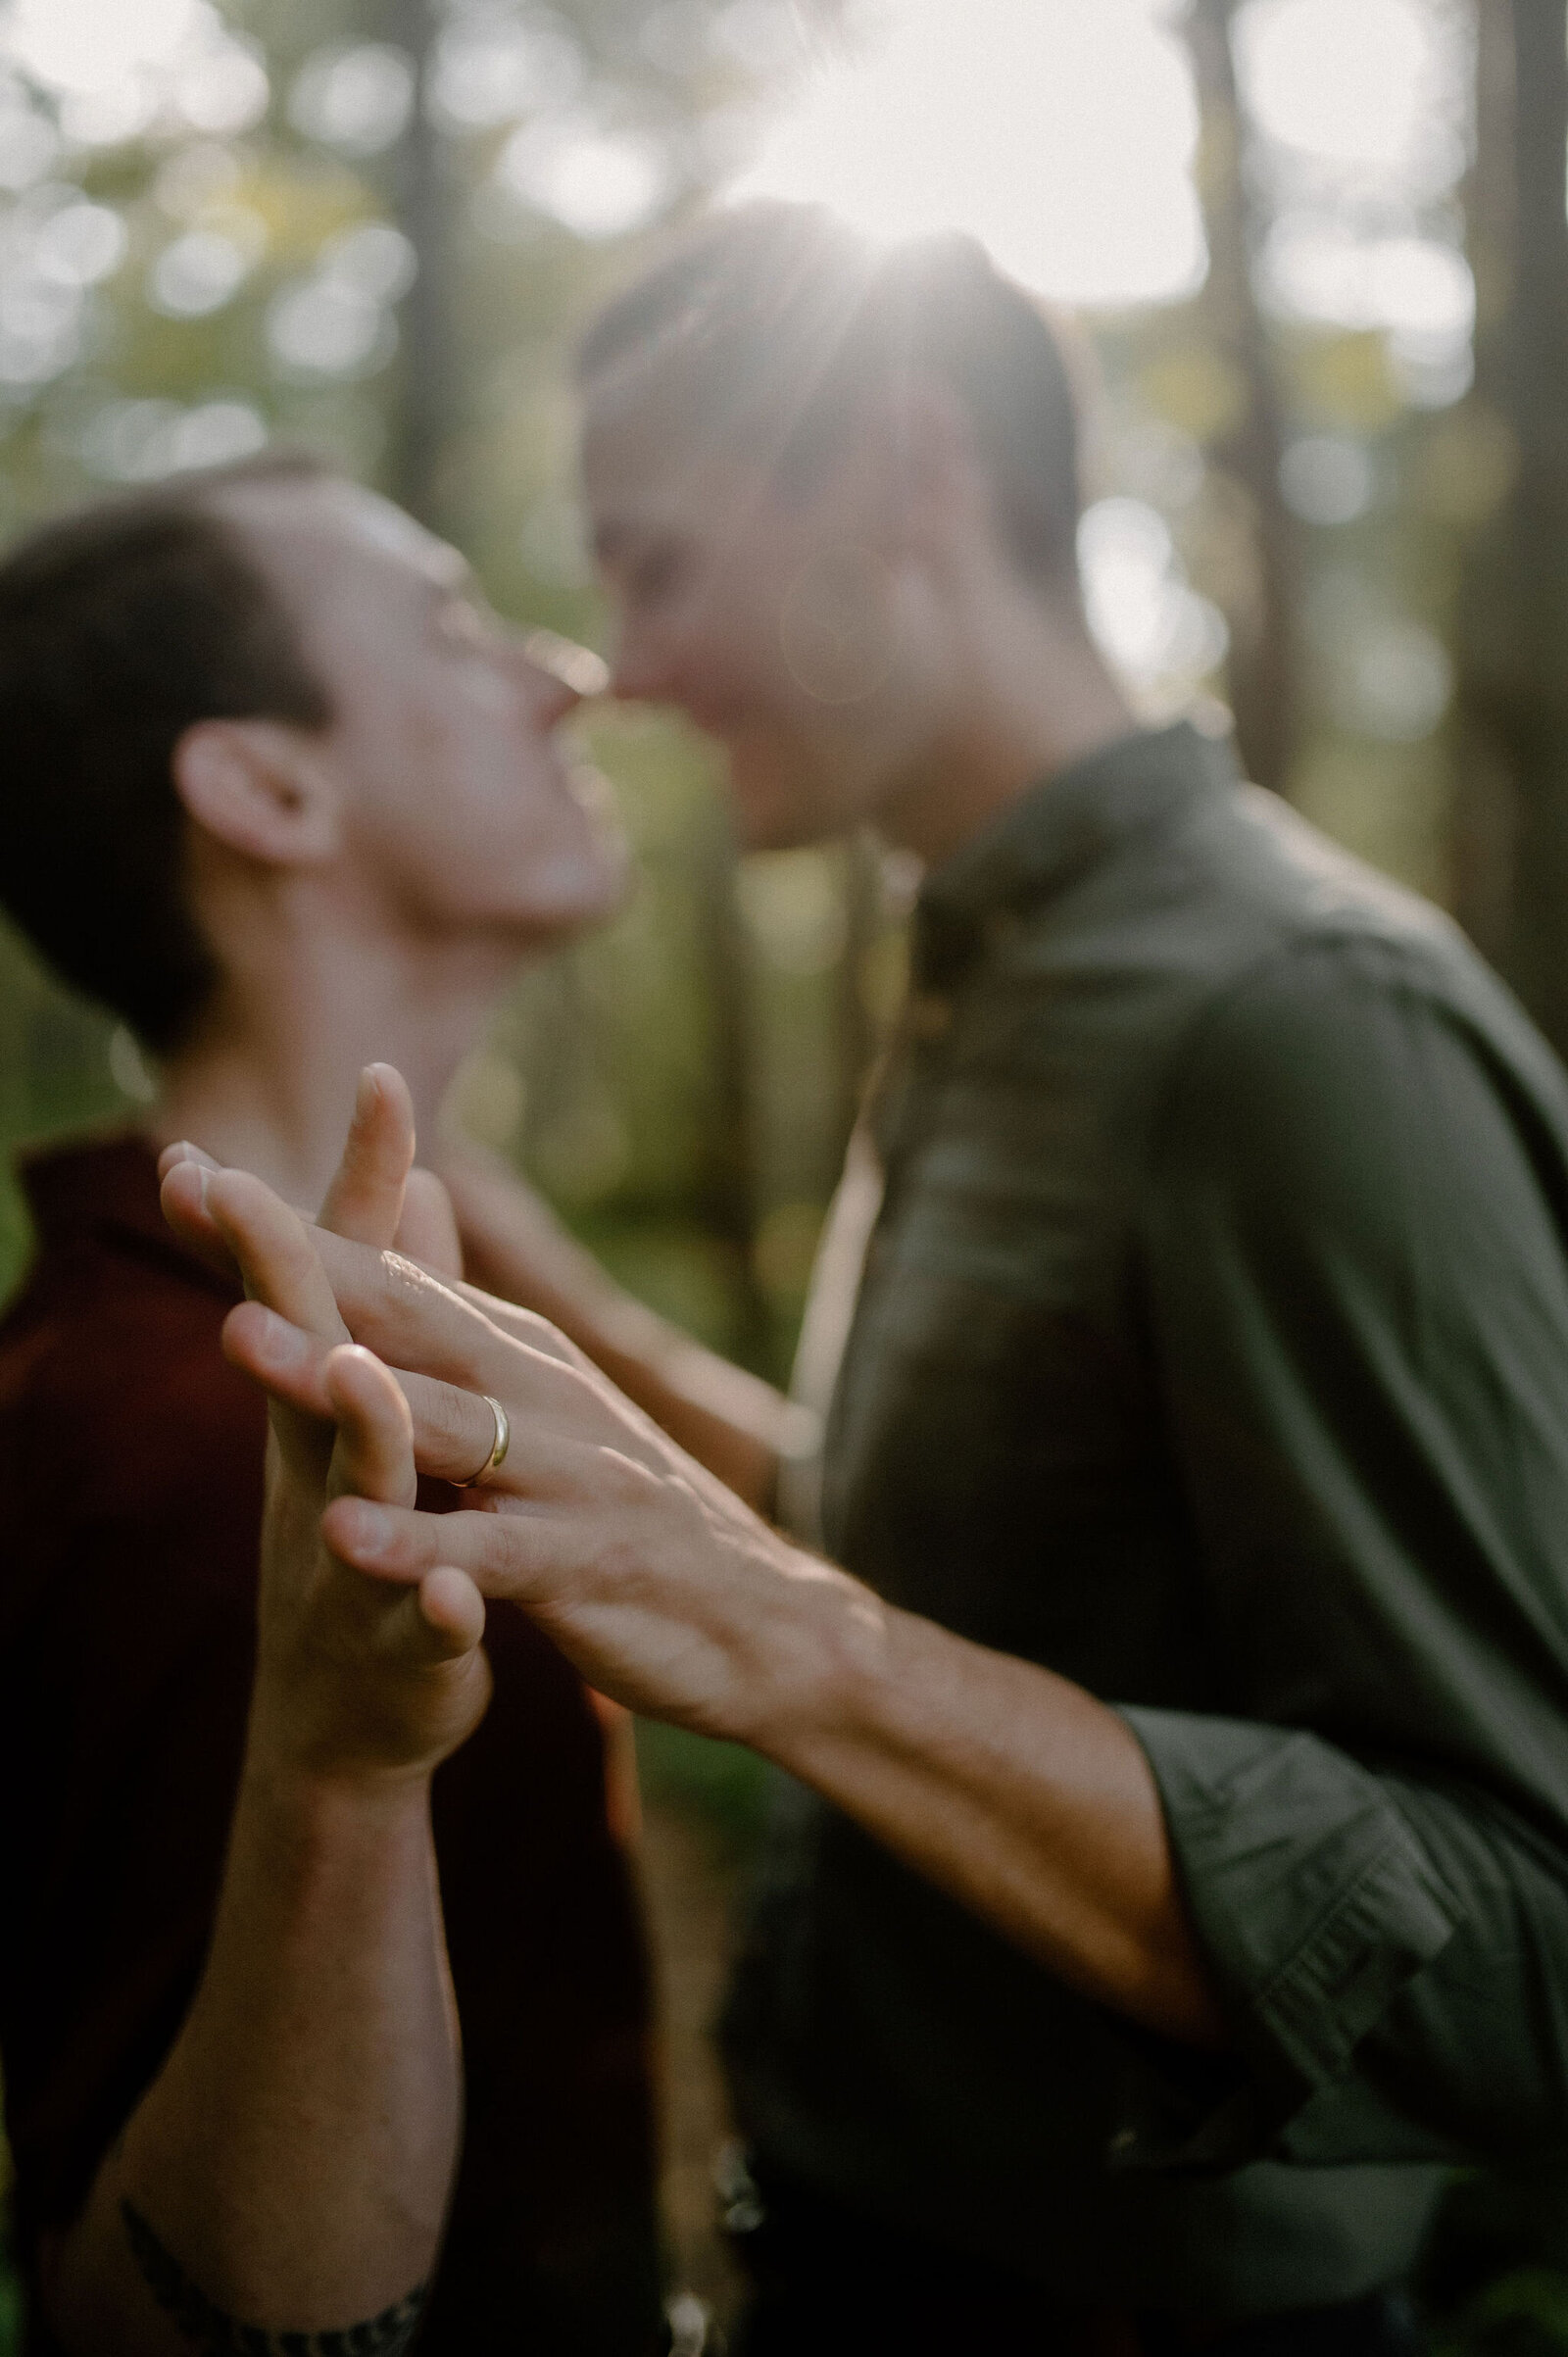 couple holding hands in outdoor forest holding hands fingers interlaced wedding ring close up